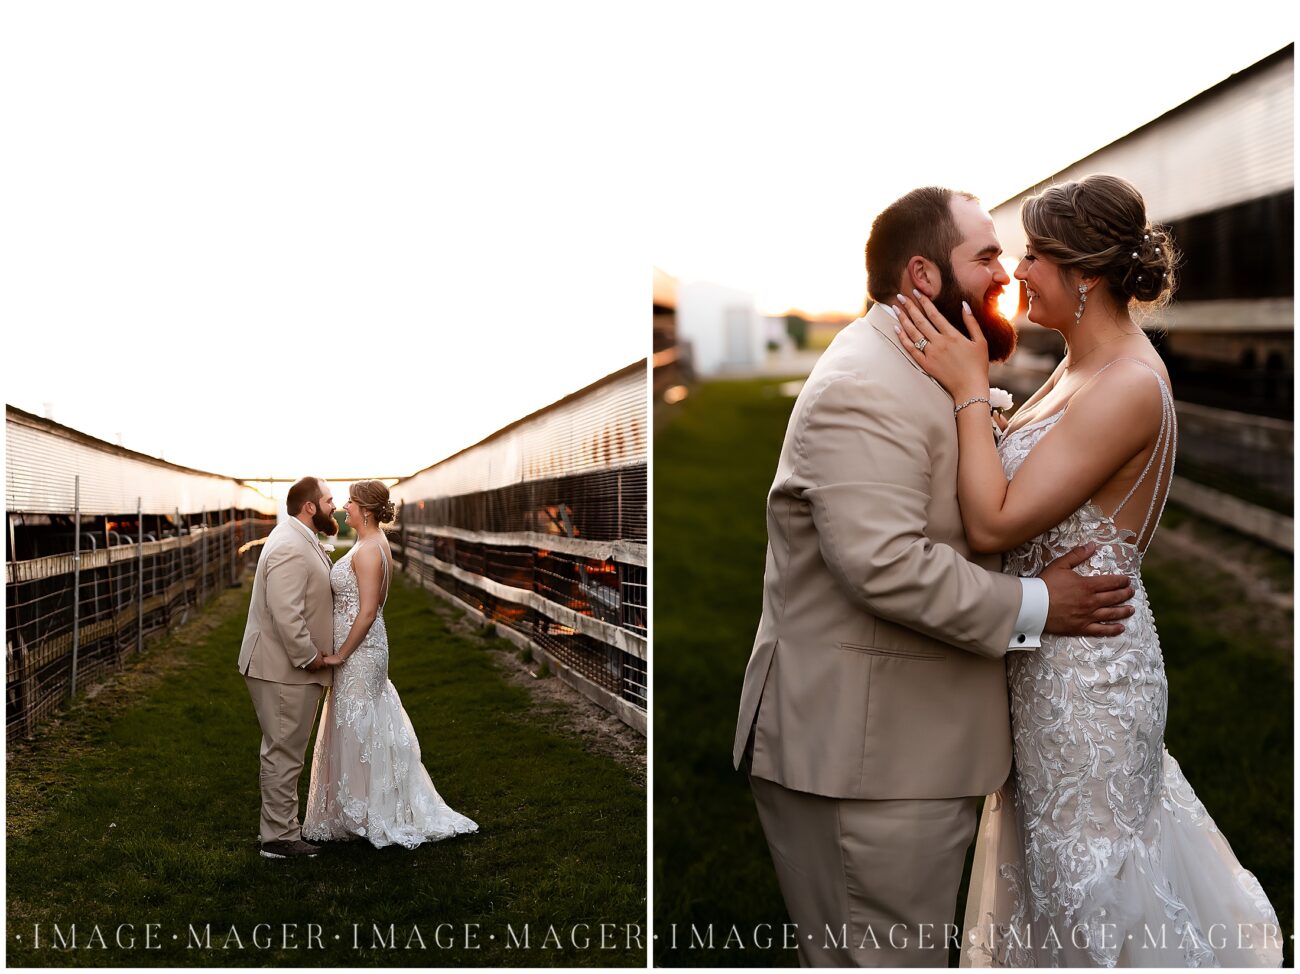 A small town wedding for Casey and Adam. The bride and groom pose for two portraits in a pathway near a barn at the Kankakee County Fairgrounds.

Kankakee County Fairgrounds, Kankakee, IL.

Photo taken by Mager Image Photography.